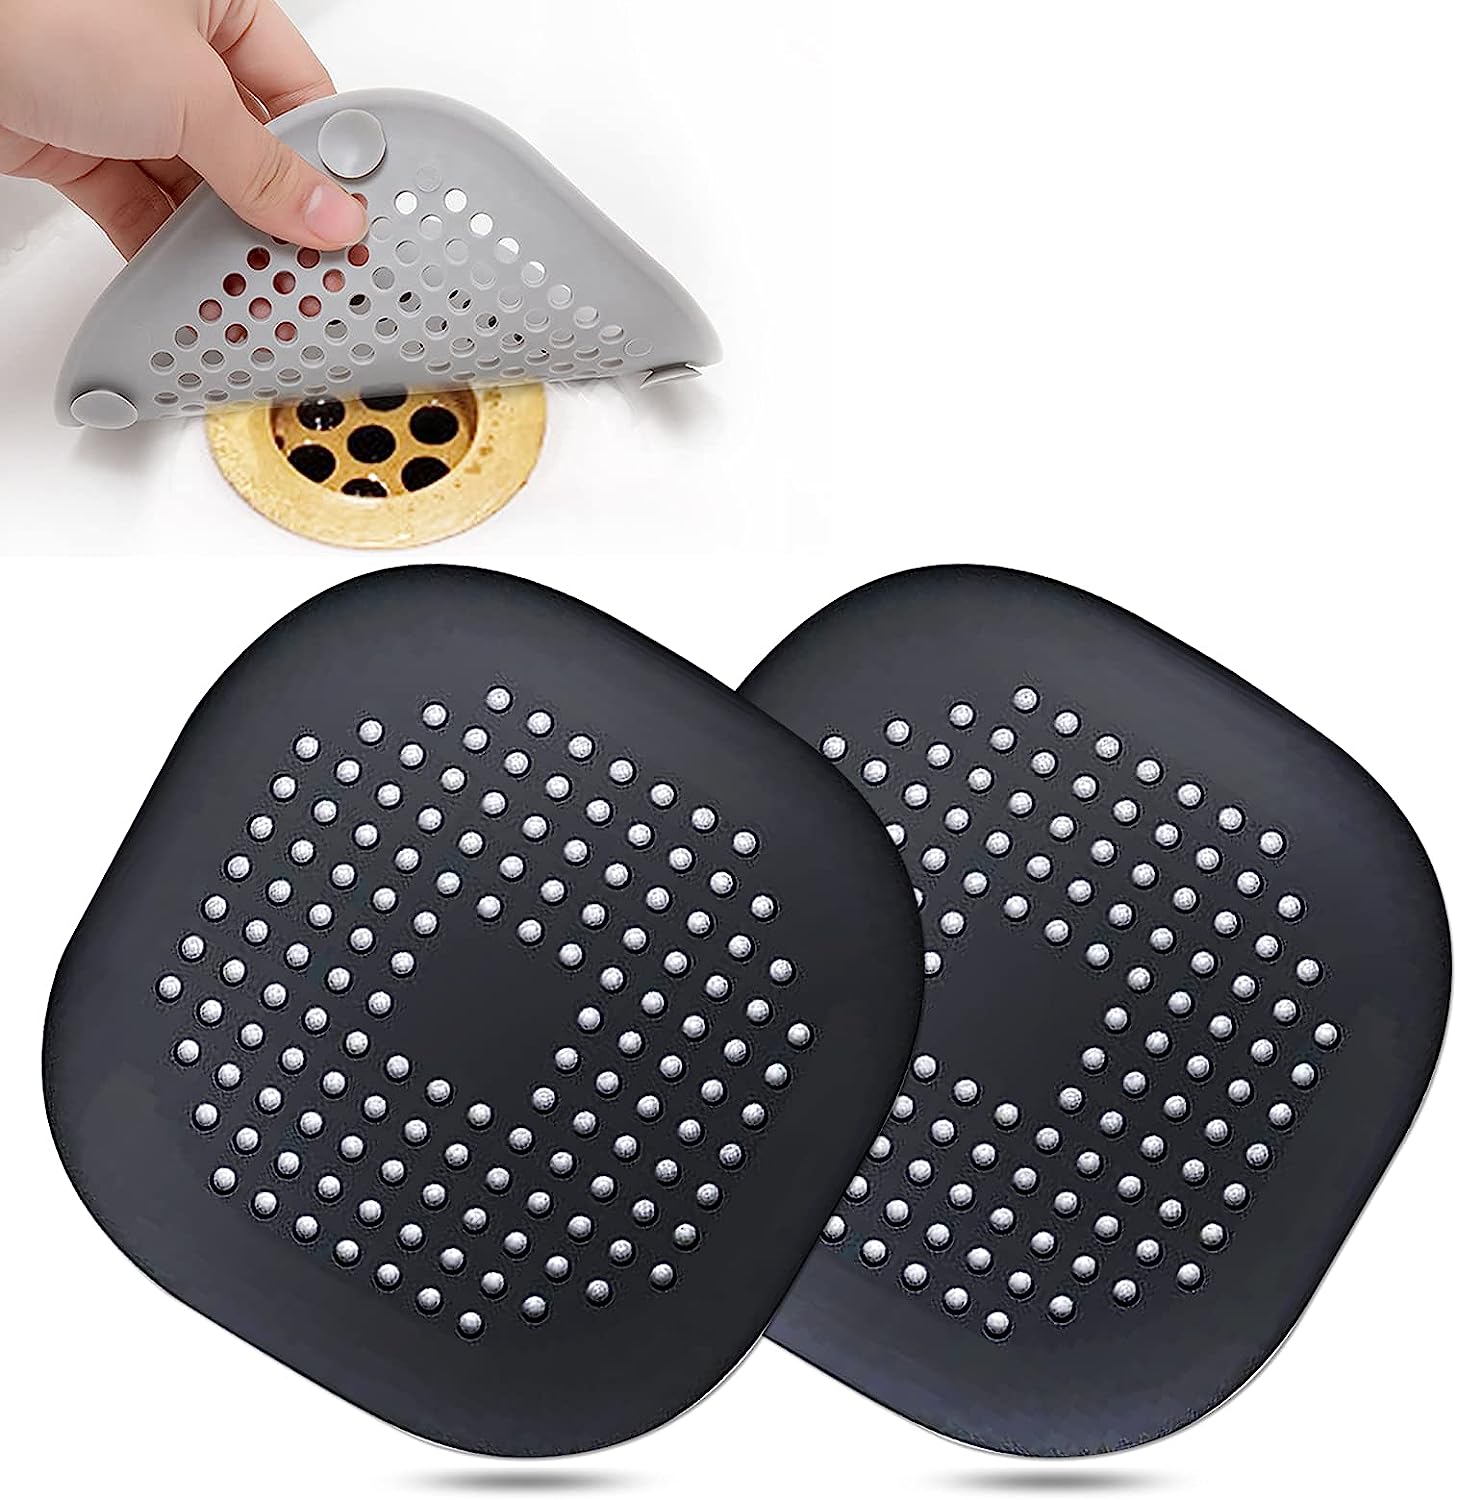 Hair Drain Catcher,Square Drain Cover for Shower [...]